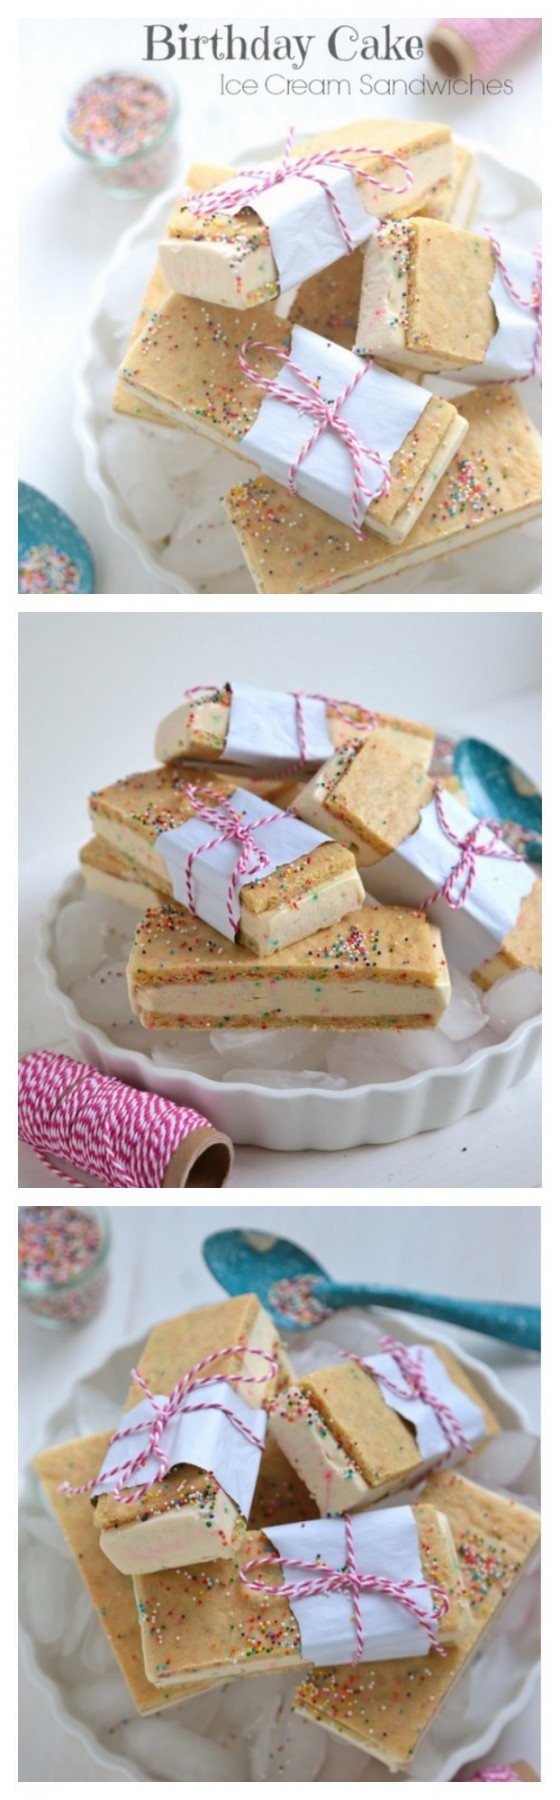 Homemade Birthday Cake Ice Cream Sandwiches with Sprinkles! - It's like a frozen birthday cake!